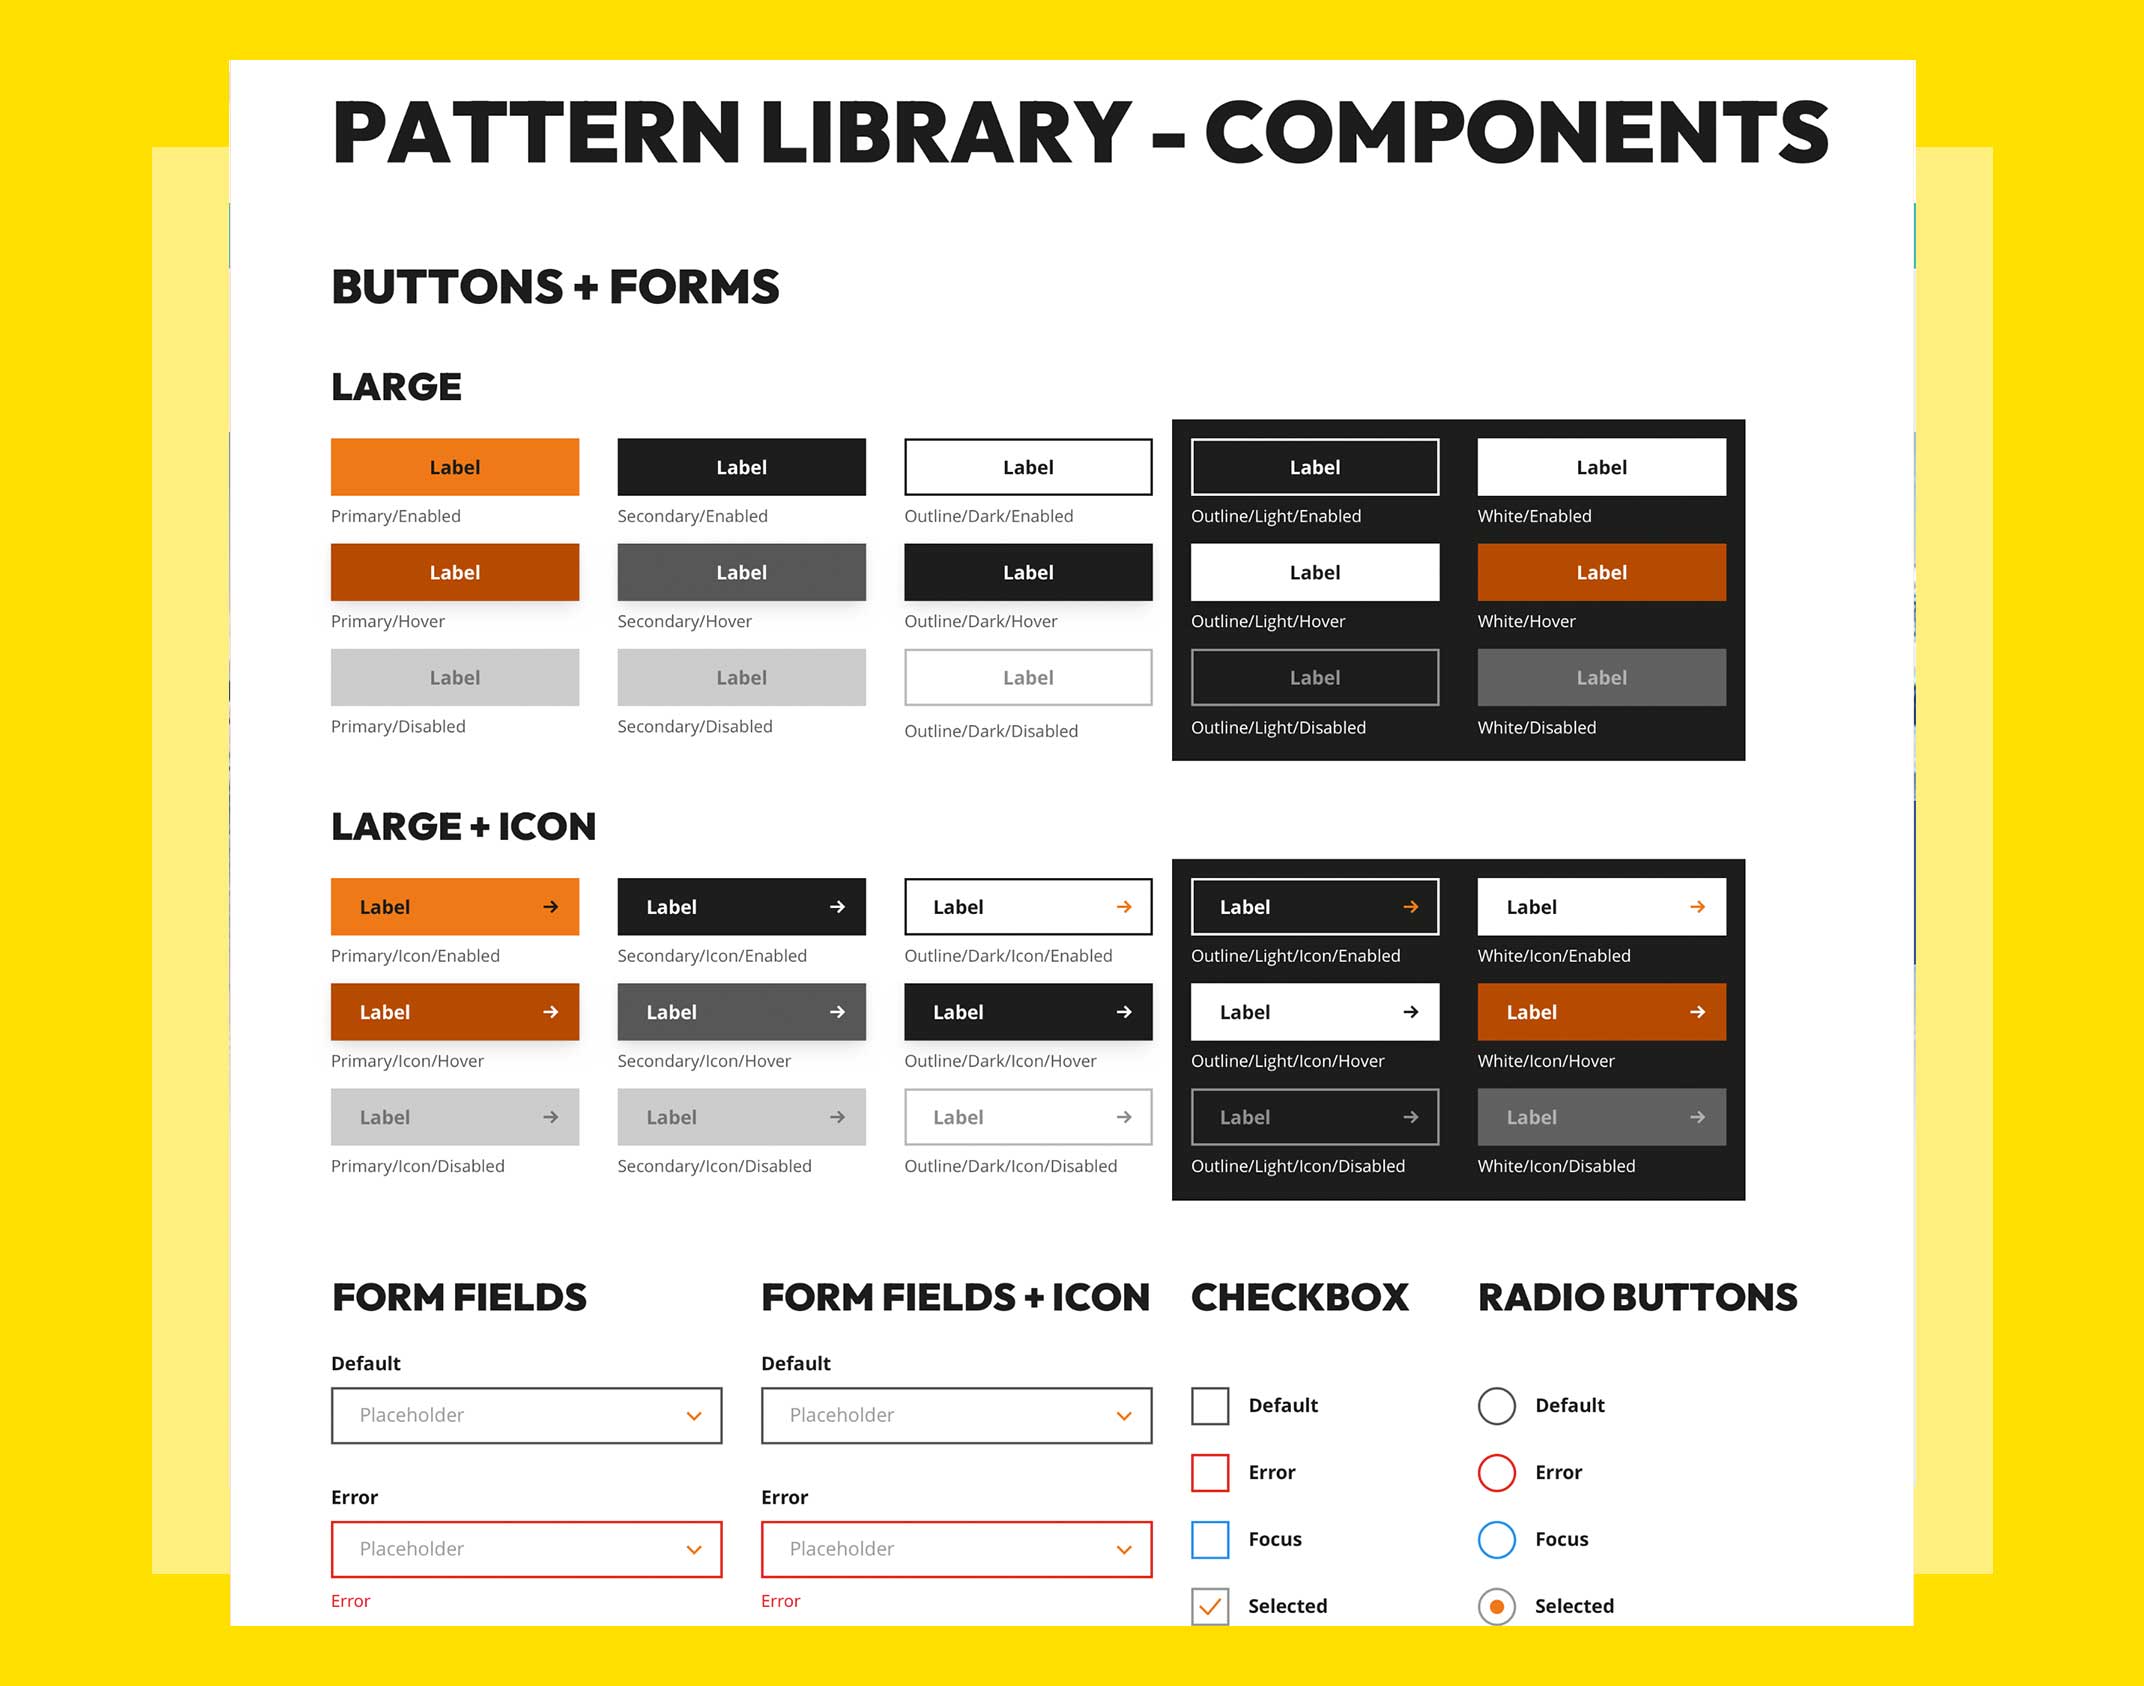 A screenshot of the pattern library we designed for Greater Brighton, showing many button and link components broken down.